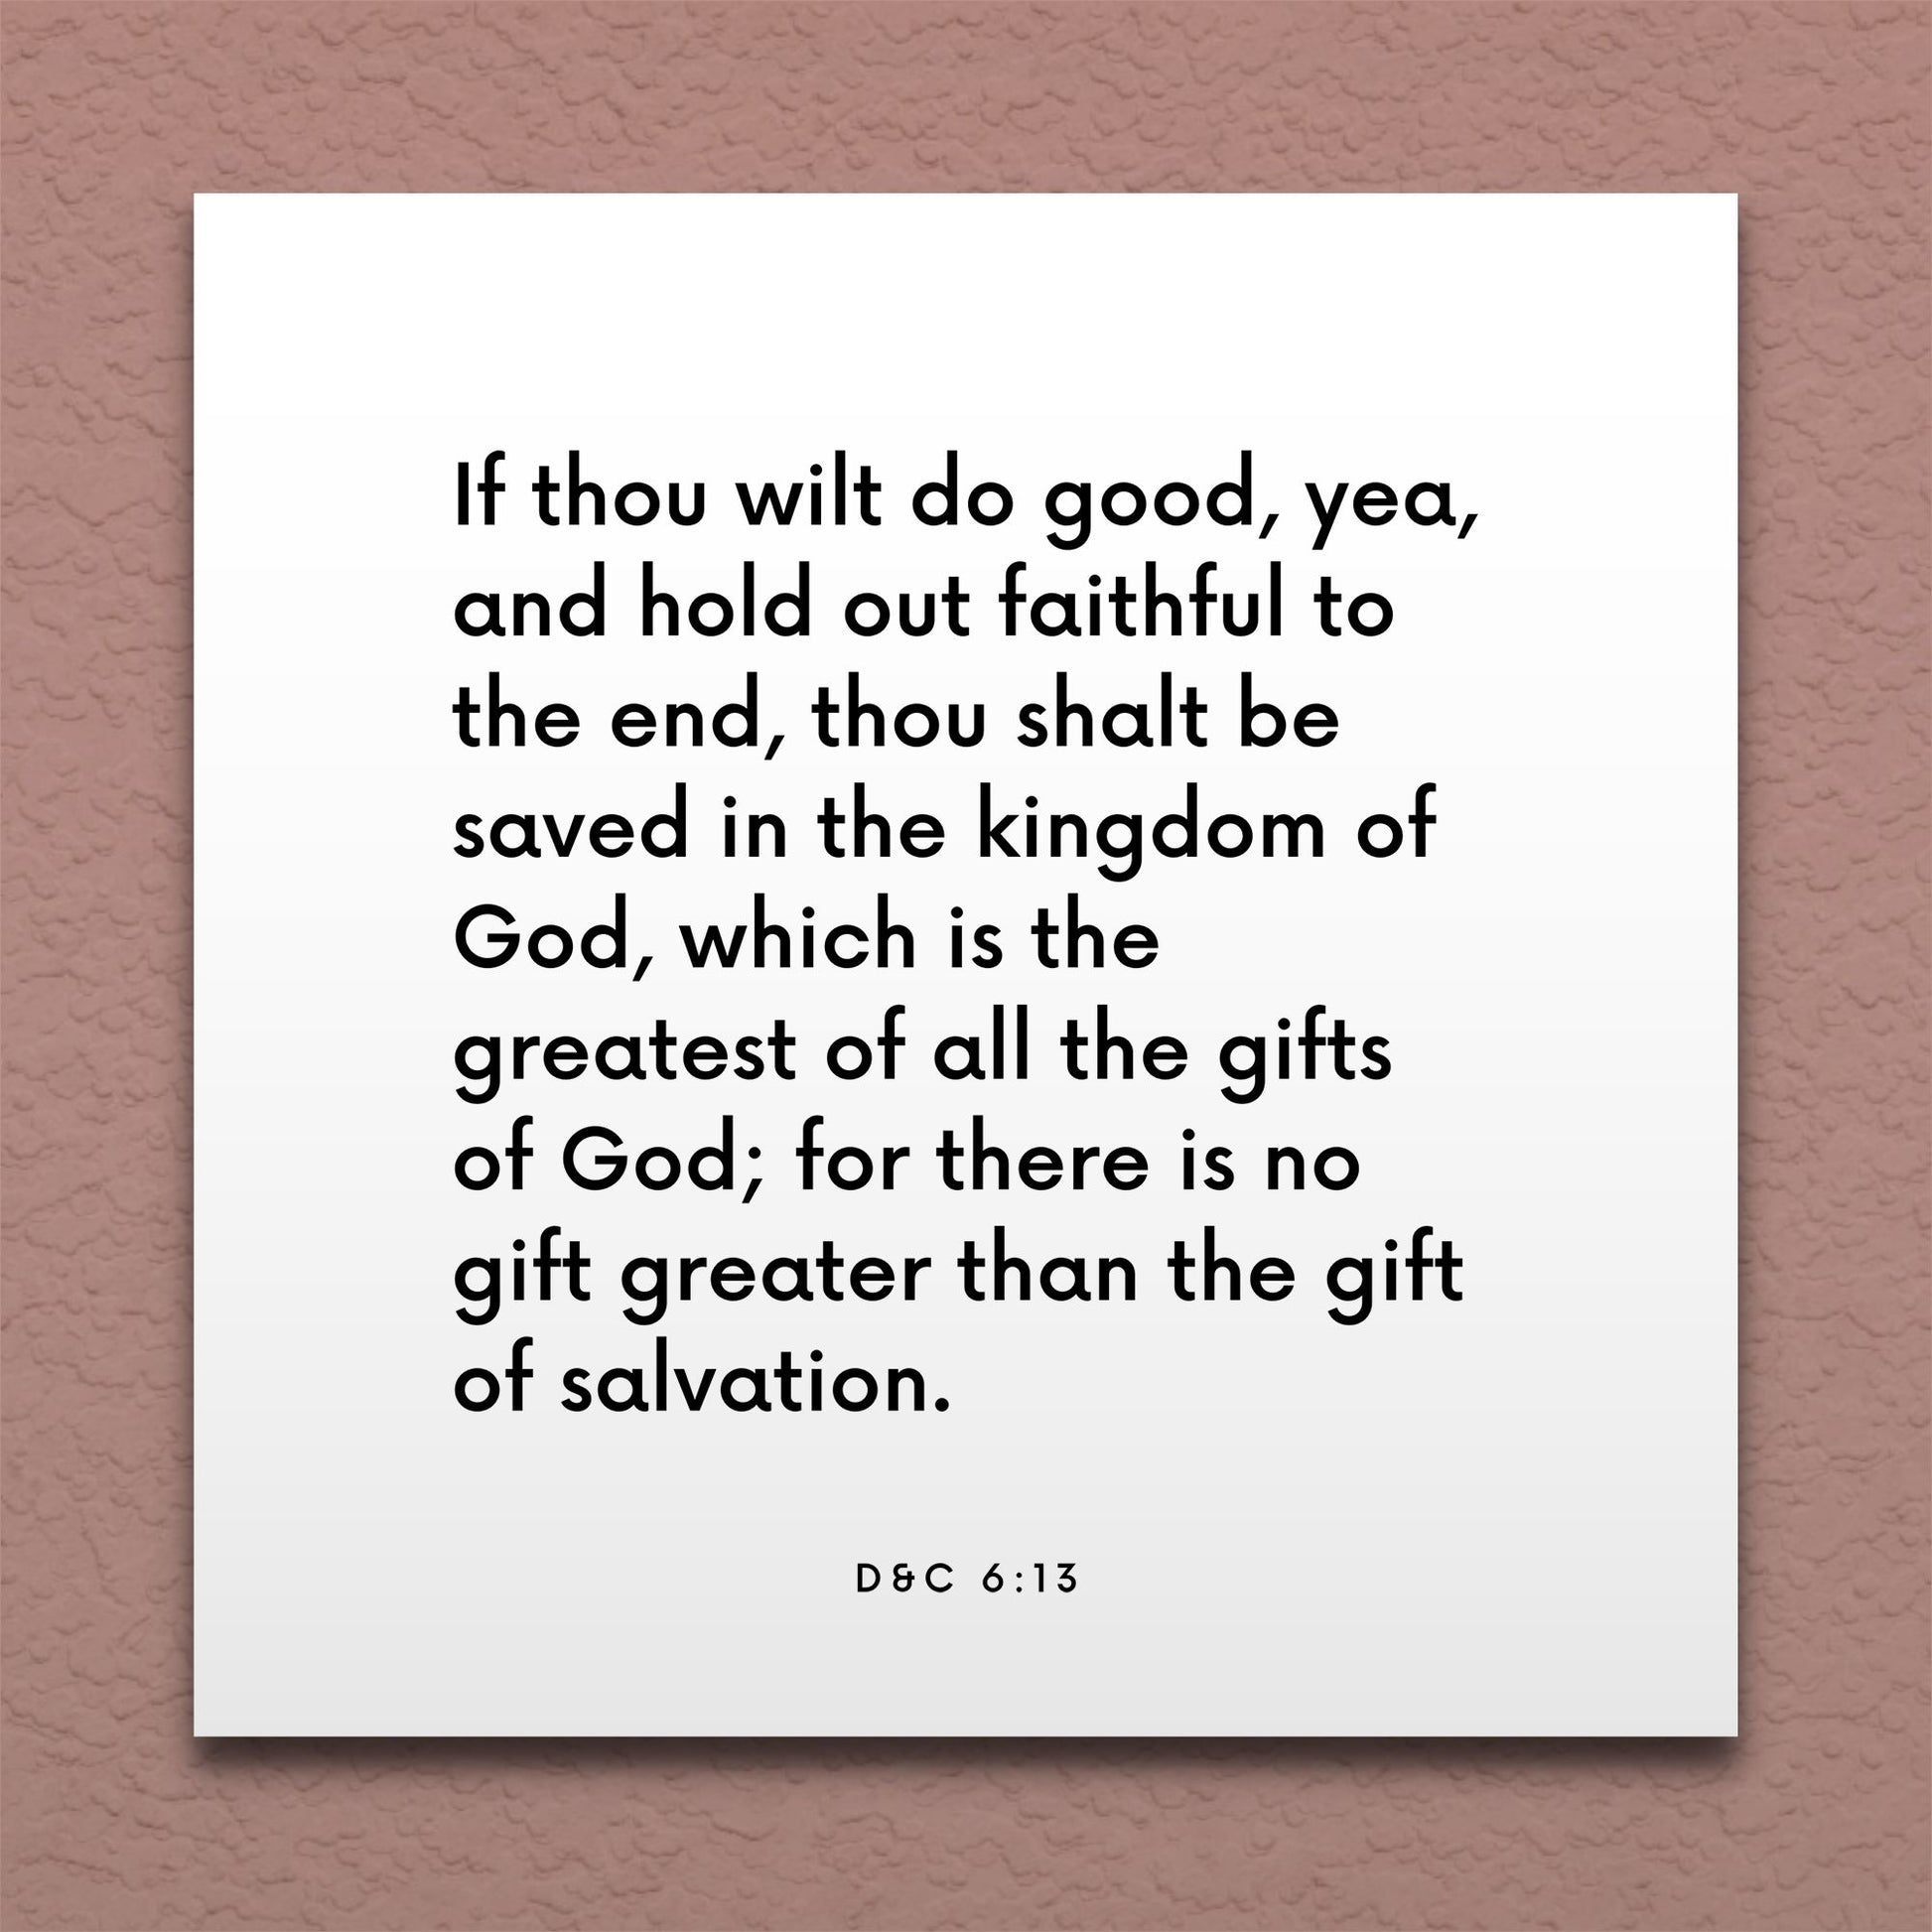 Wall-mounted scripture tile for D&C 6:13 - "There is no gift greater than the gift of salvation"